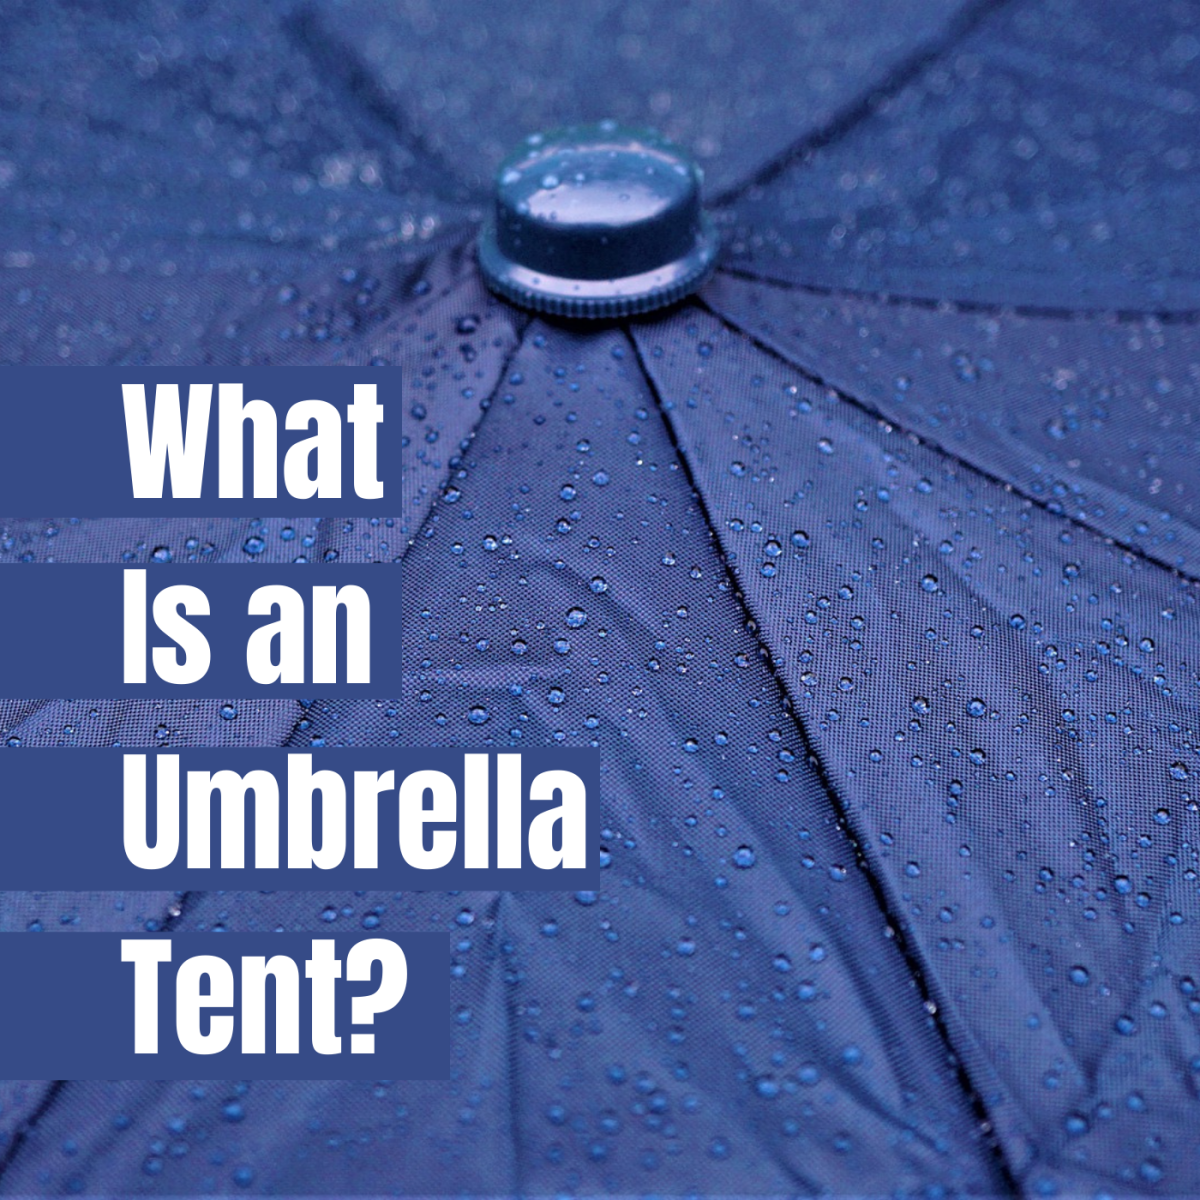 What is an umbrella tent?